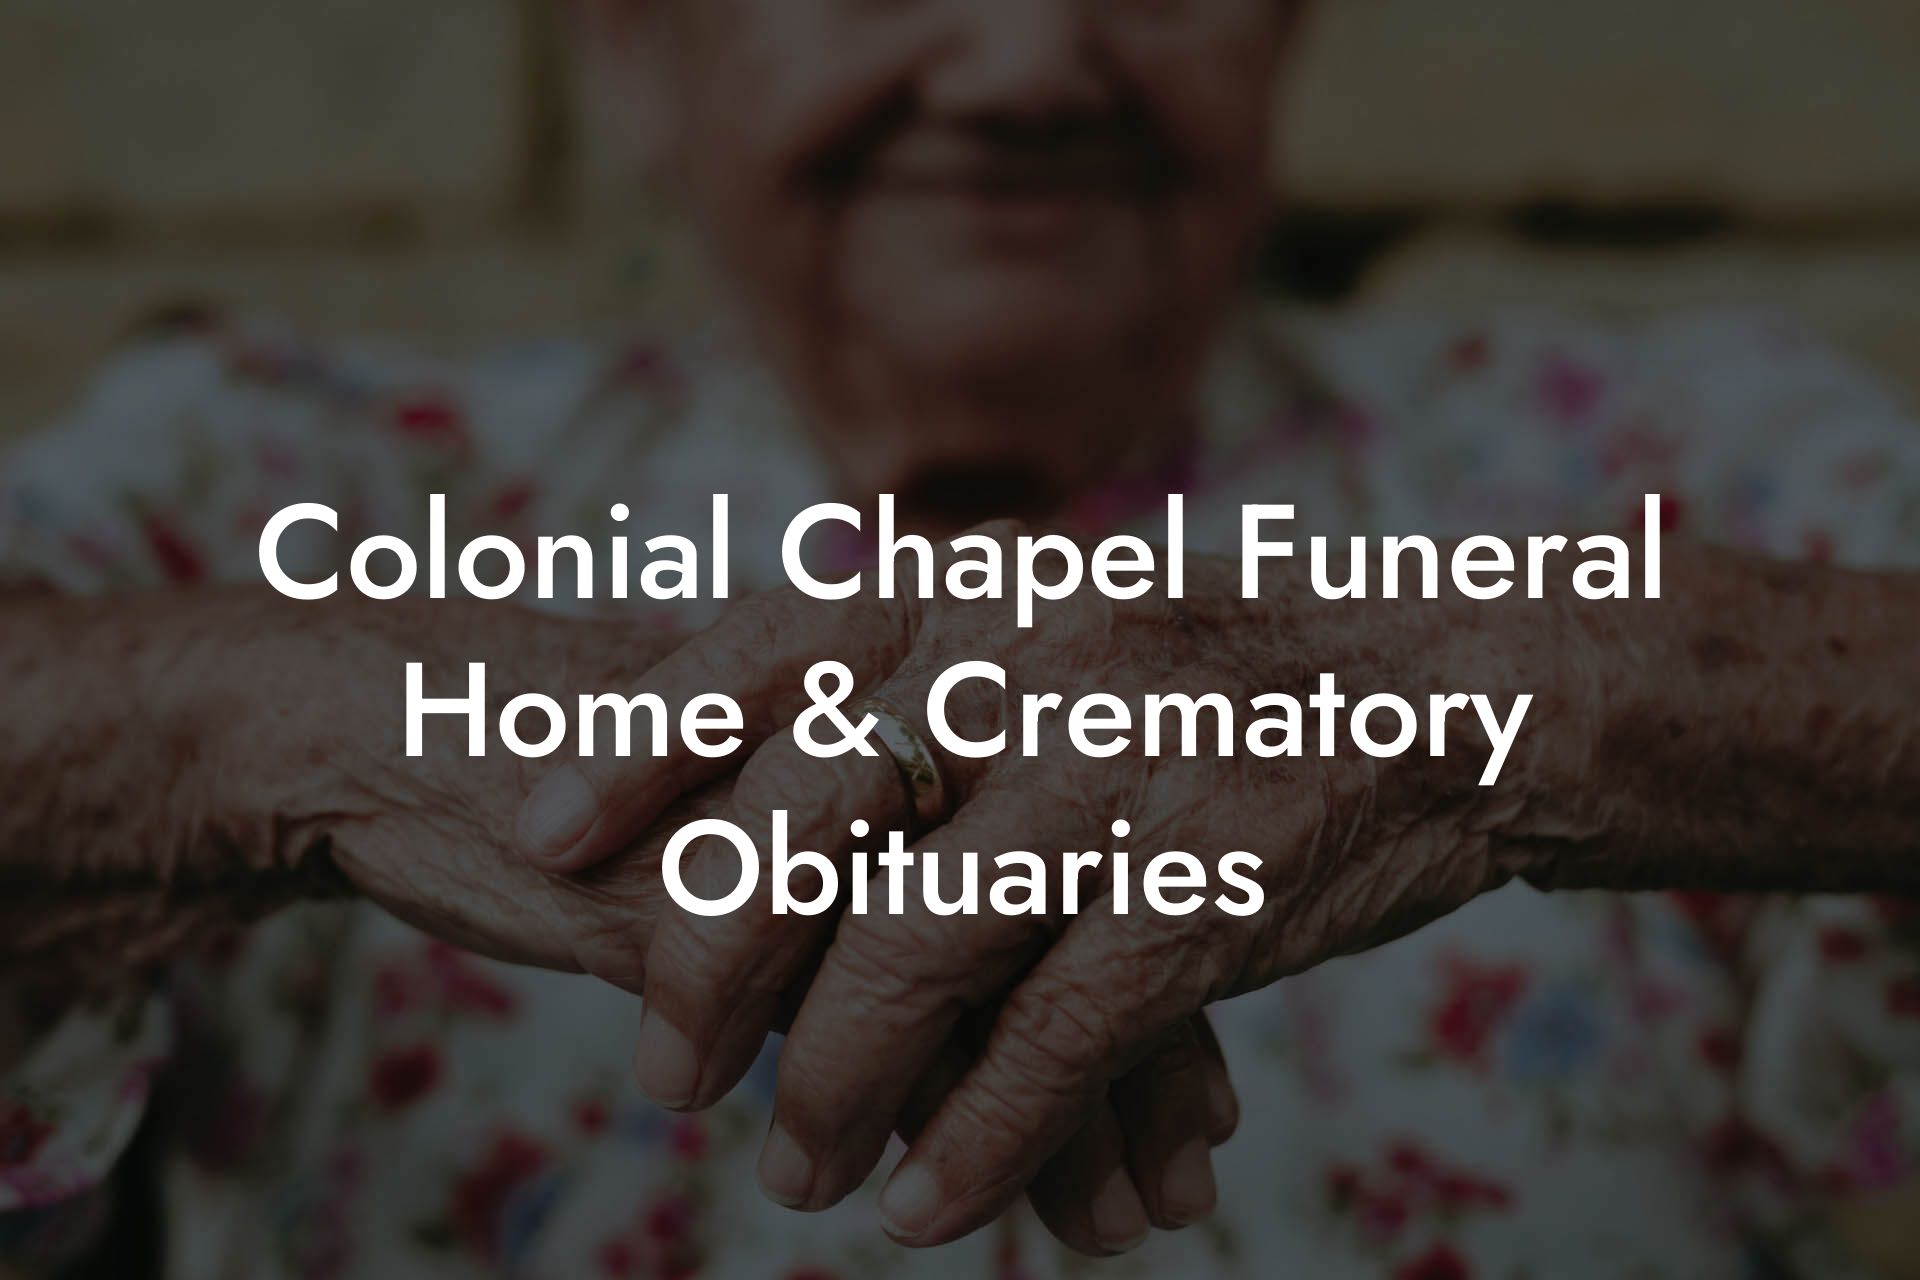 Colonial Chapel Funeral Home & Crematory Obituaries - Eulogy Assistant